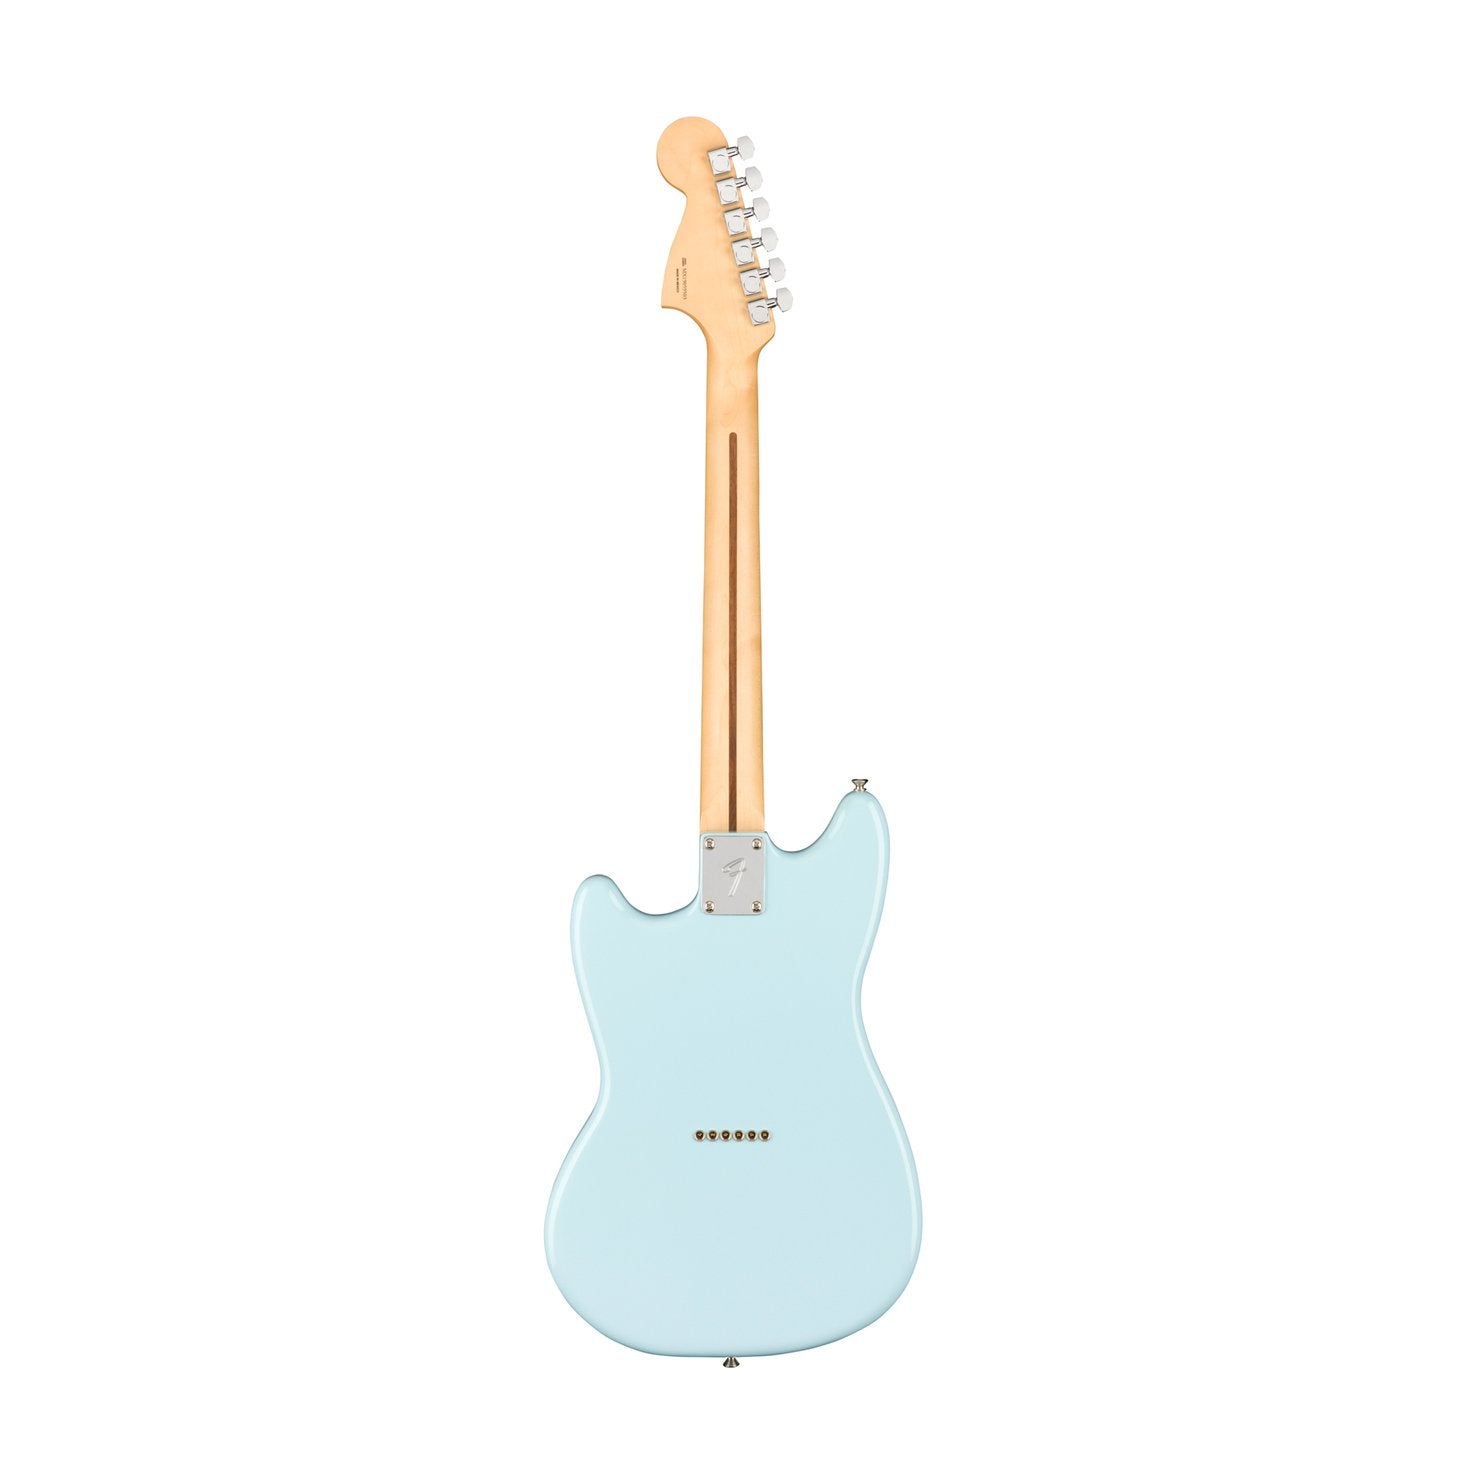 Fender Player Mustang Electric Guitar, Maple FB, Sonic Blue, FENDER, ELECTRIC GUITAR, fender-eletric-guitar-f03-014-4042-572, ZOSO MUSIC SDN BHD